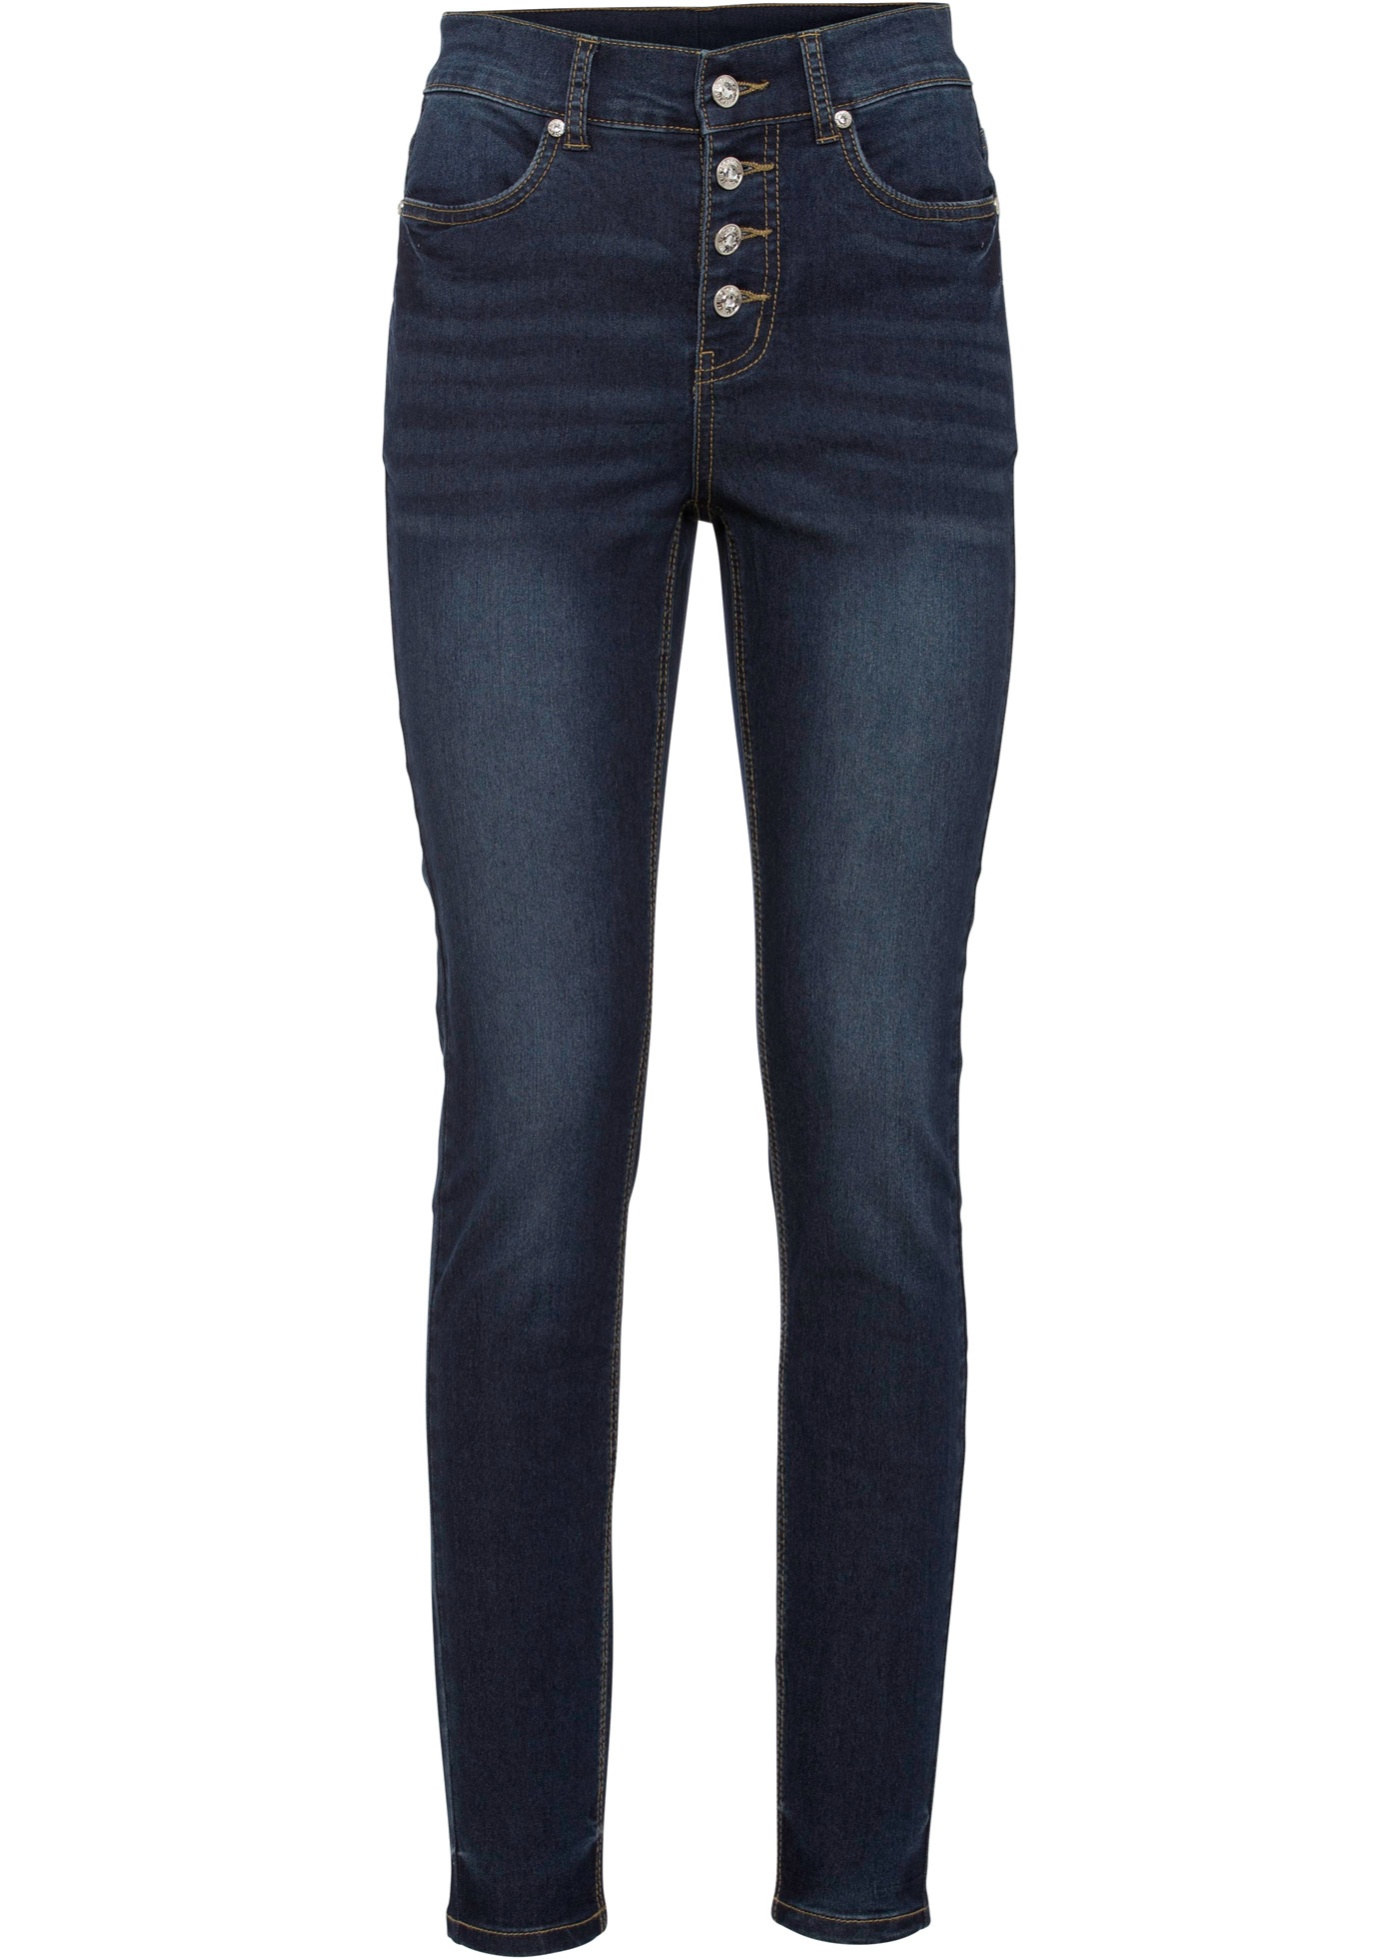 Jean extensible taille courte